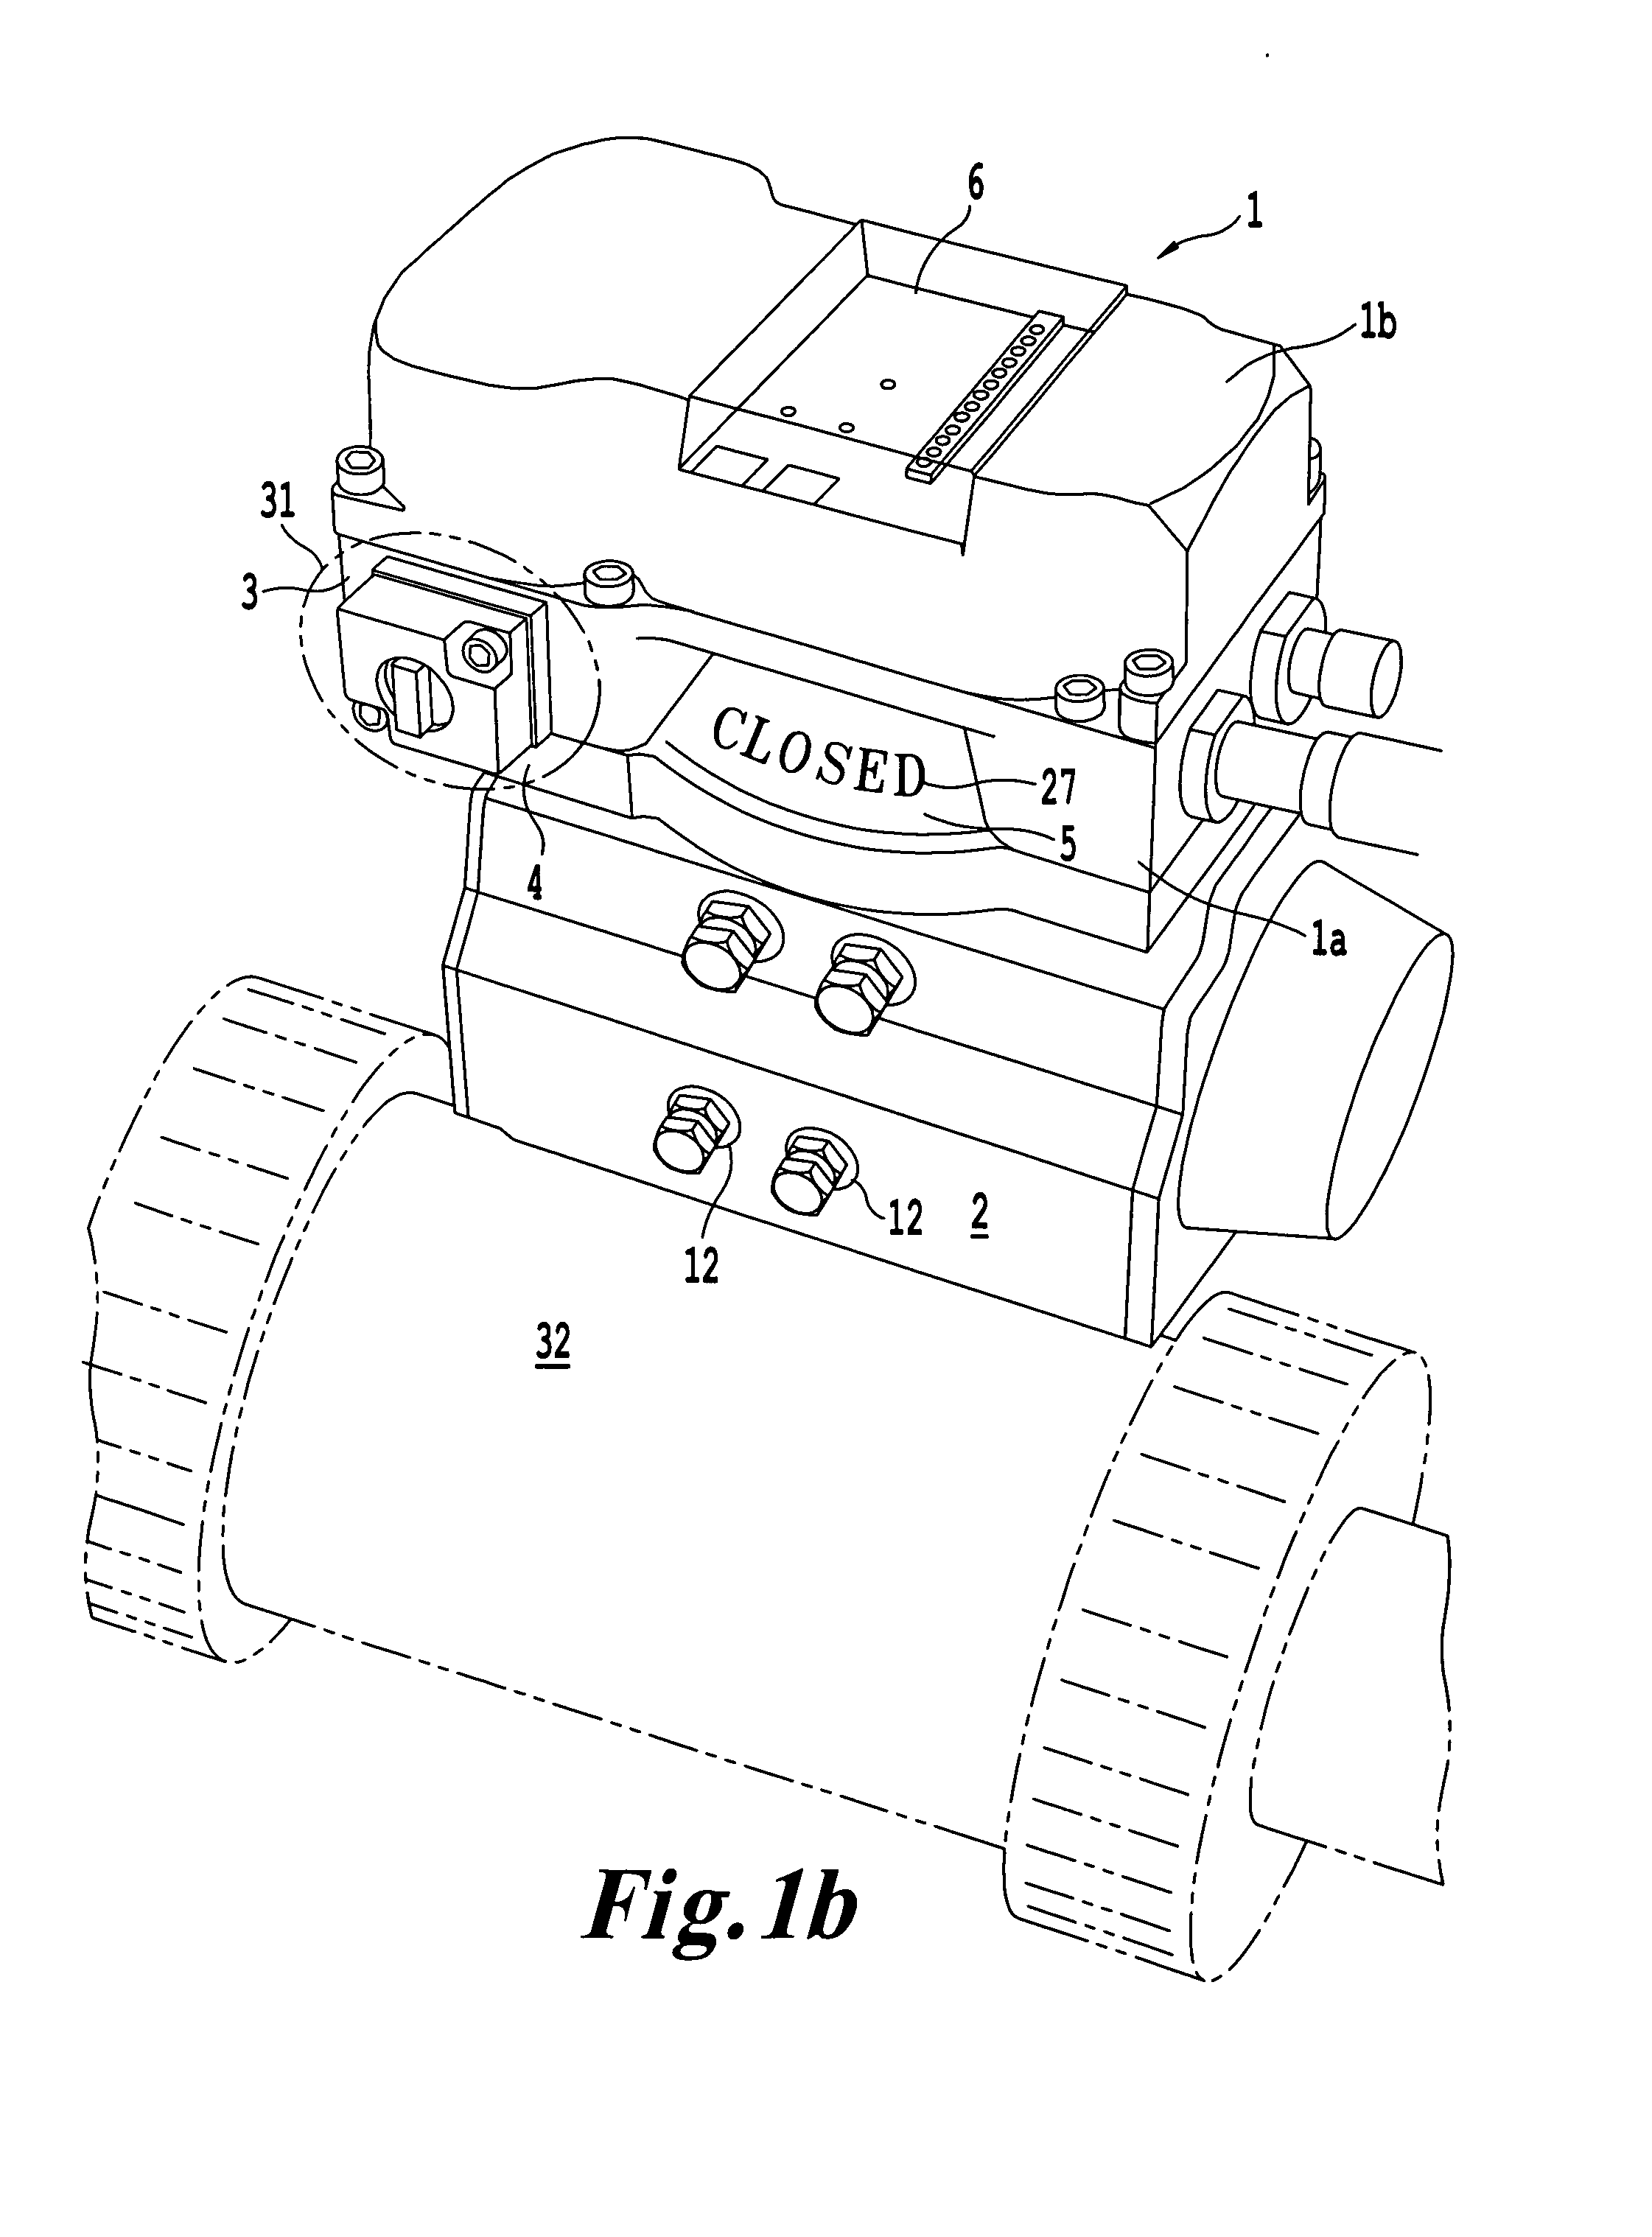 Apparatus for valve communication and control